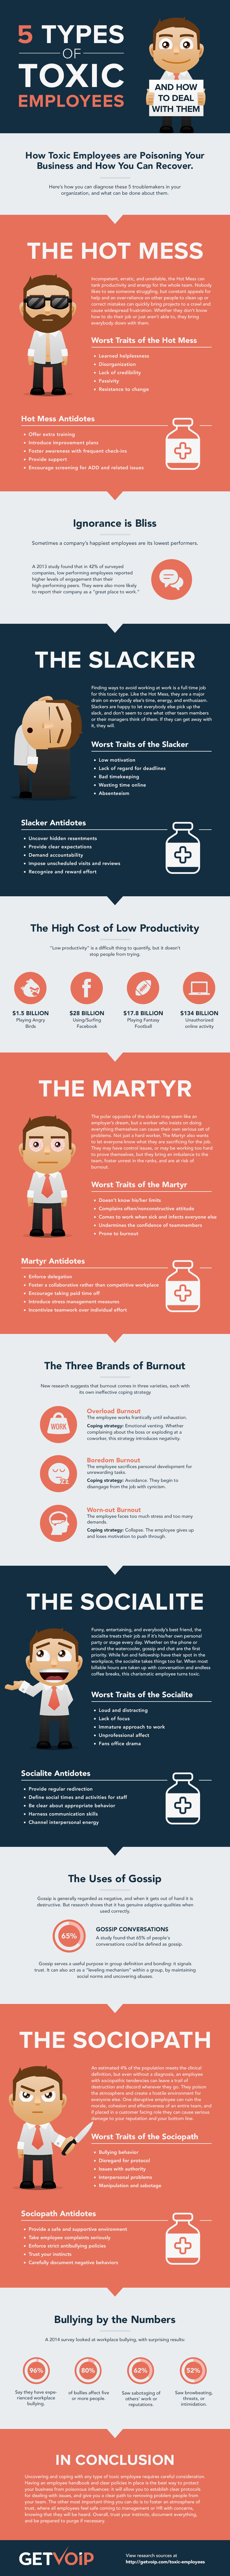 2015-02-25-toxicemployeesinfographic.png